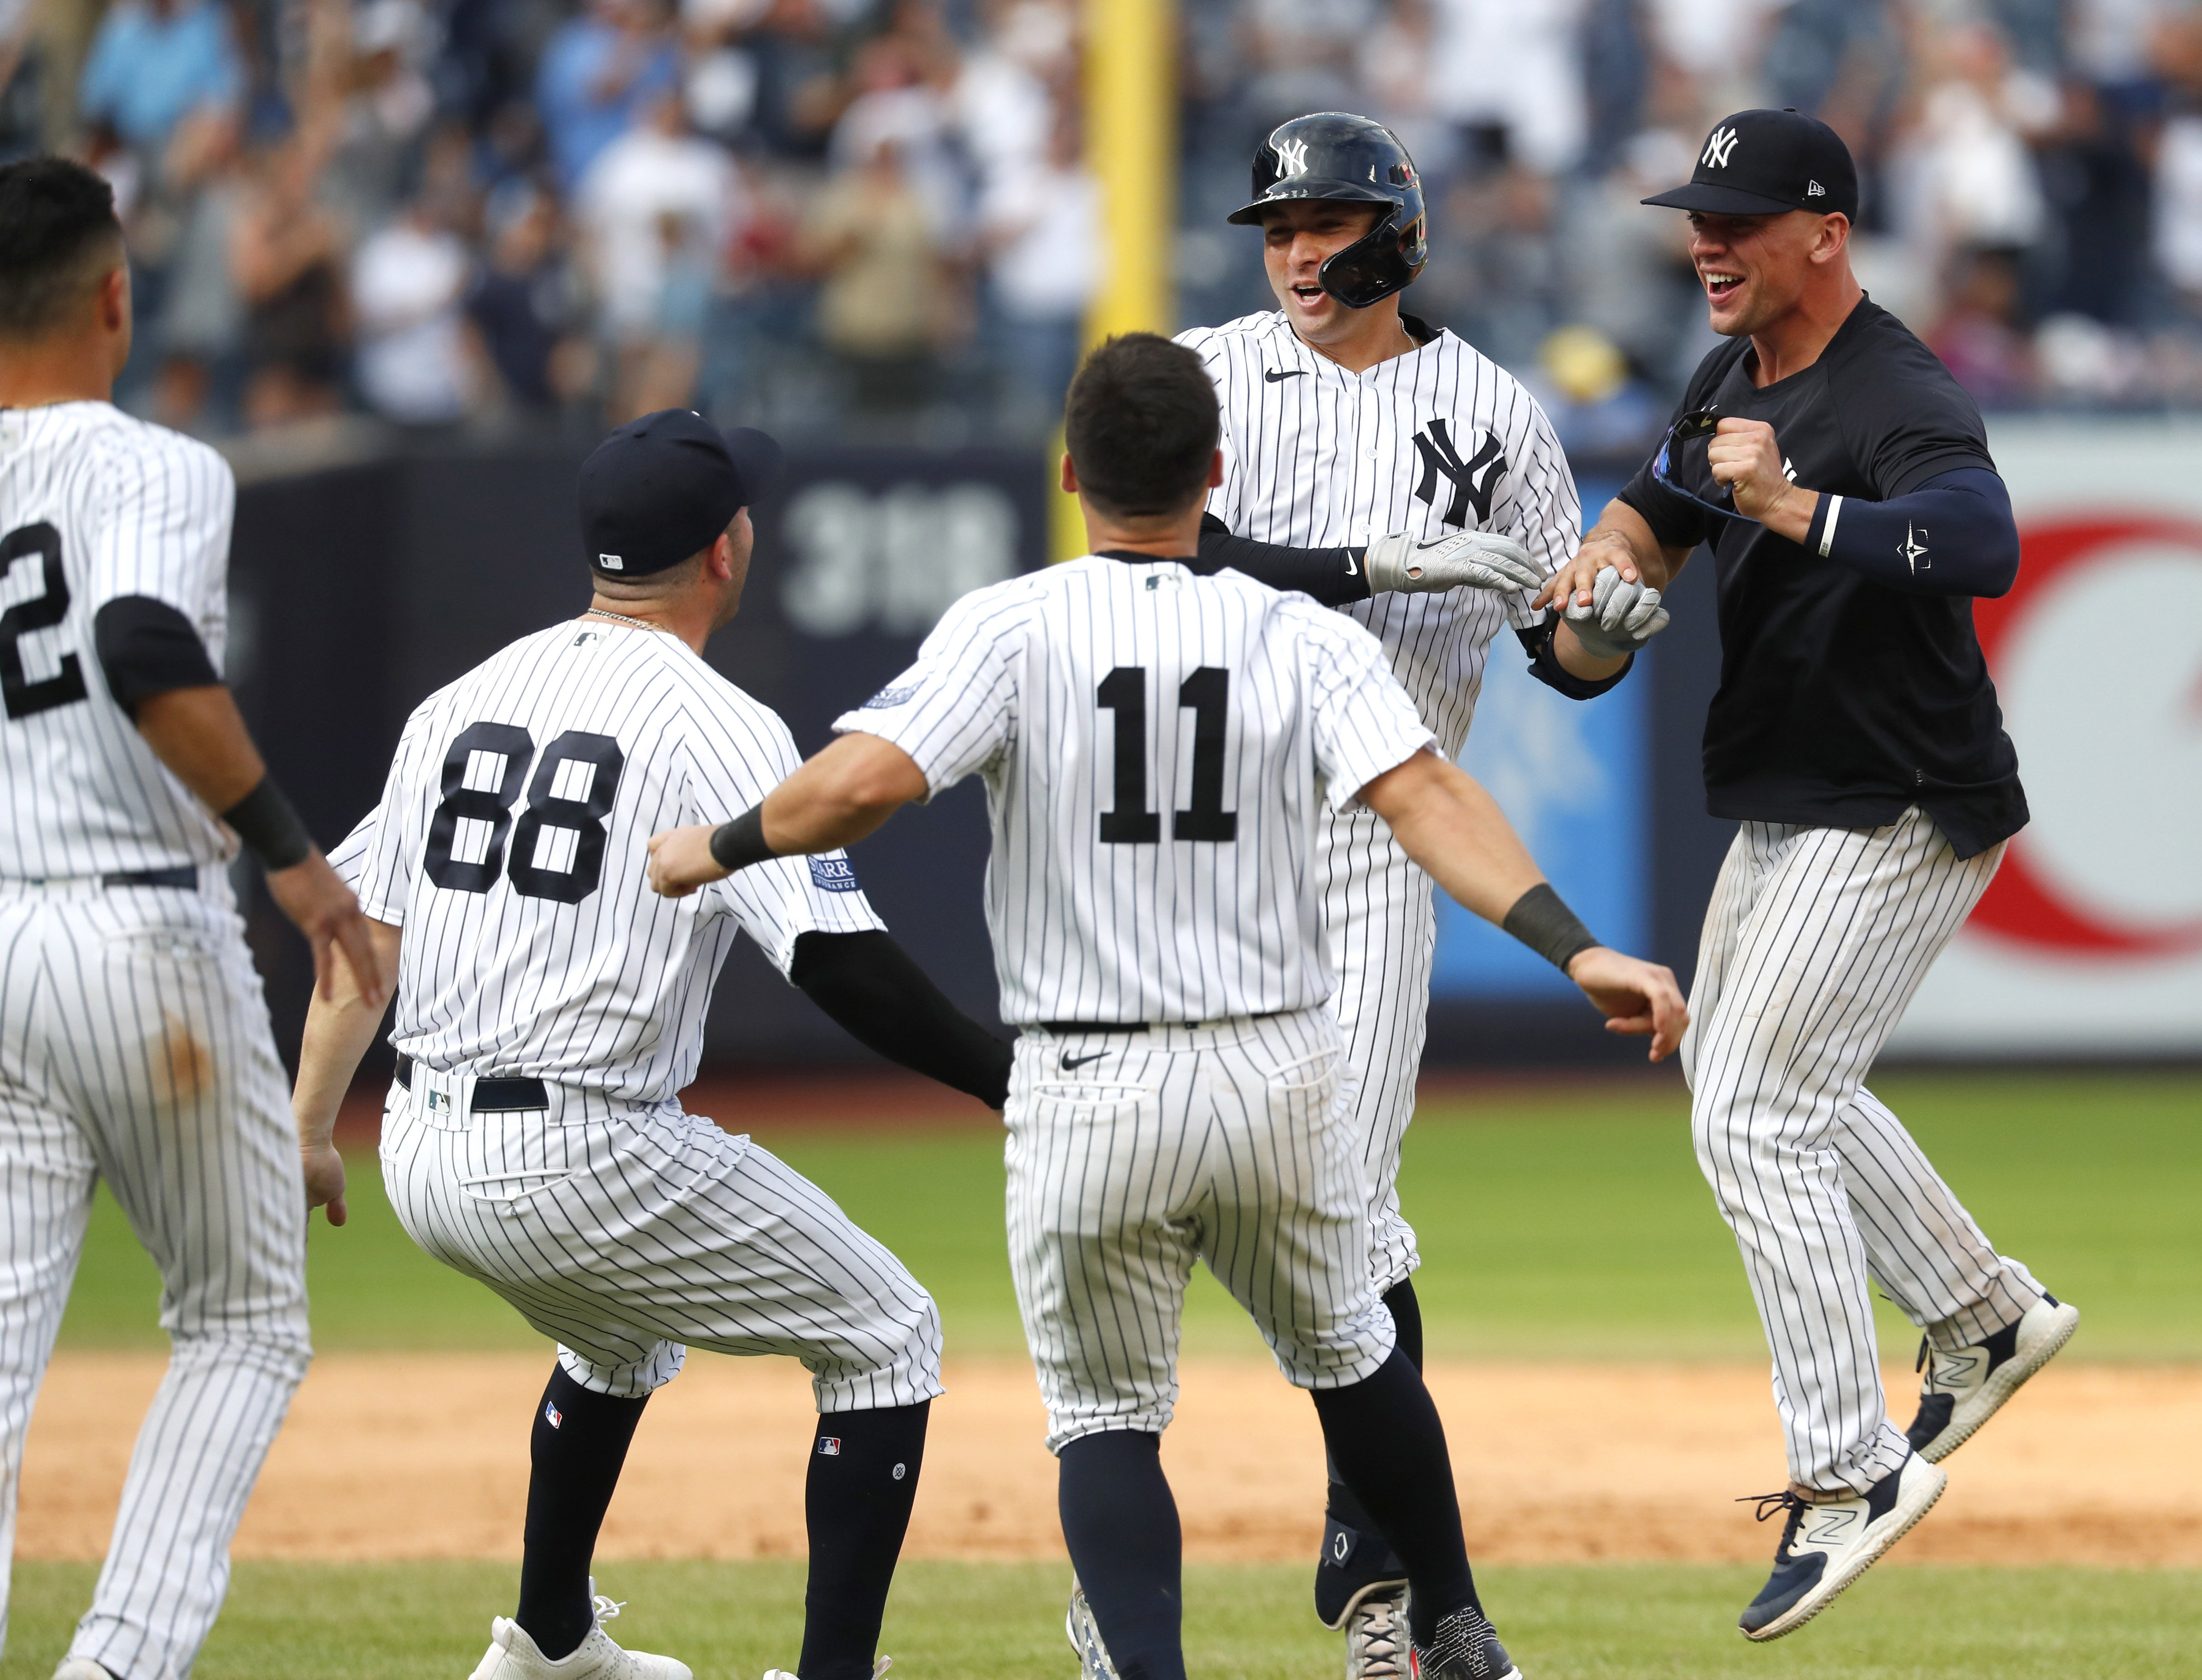 Sal Frelick preserves Brewers no-hit bid with lights-out catch in 10th, but Yankees prevail in 13 innings